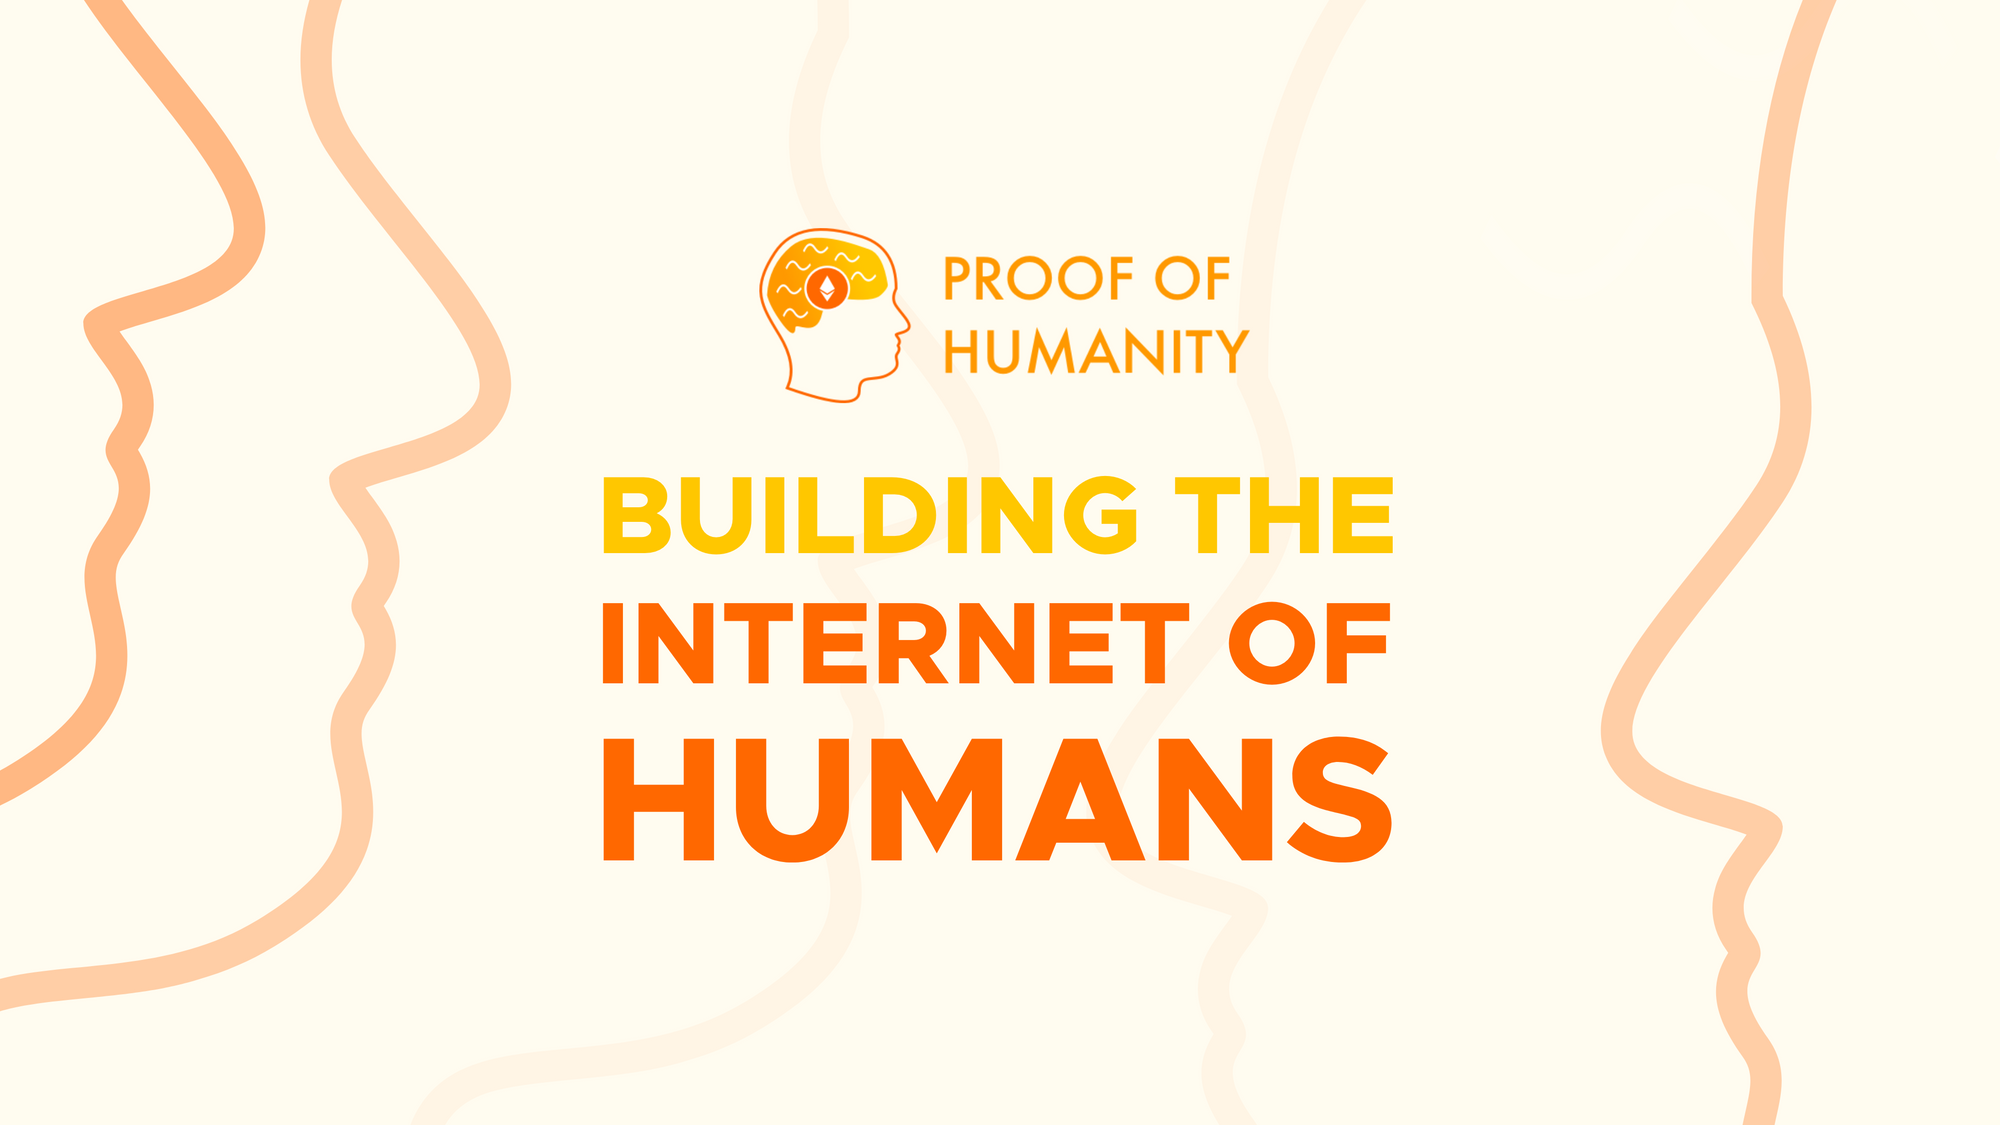 Proof of Humanity: Building the Internet of Humans